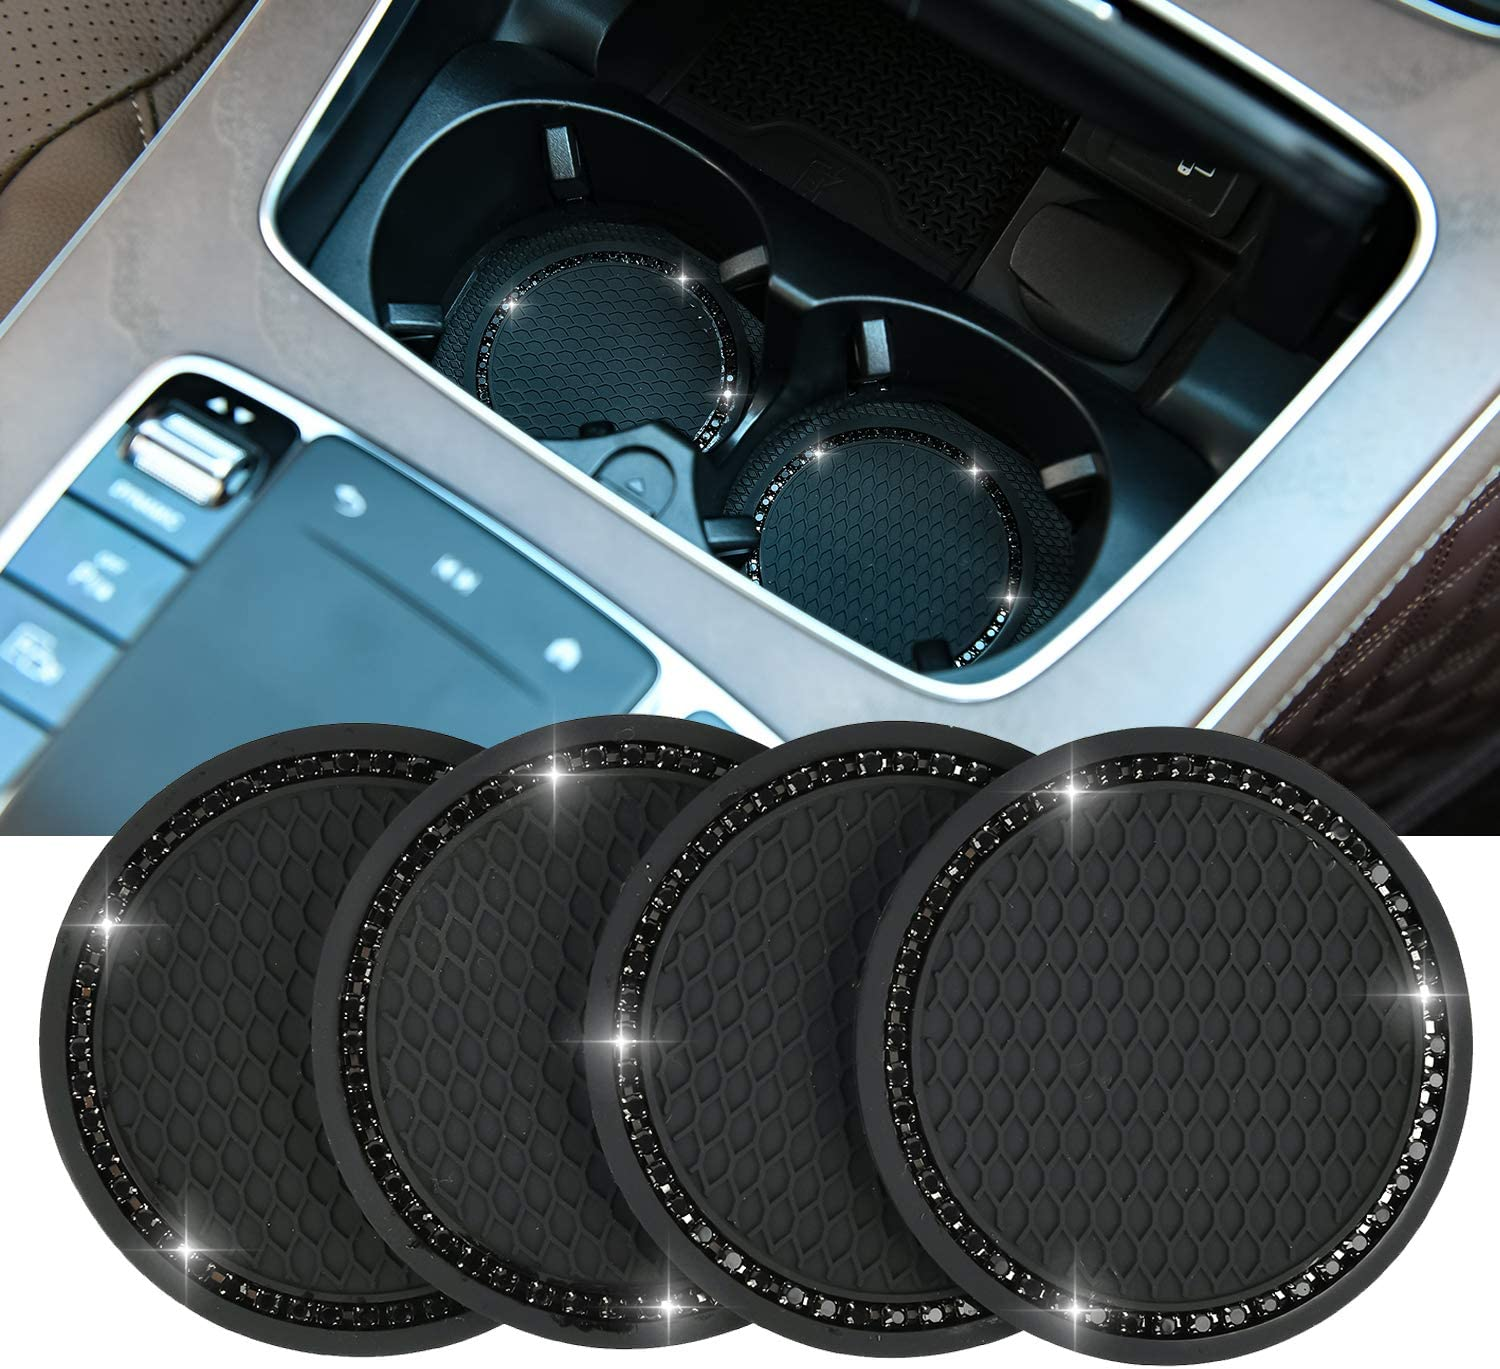 4PCS Bling Car Coasters, Universal Vehicle Car Accessories -2.75 Inch Silicone anti Slip Crystal Rhinestone Cup Holder (Black)